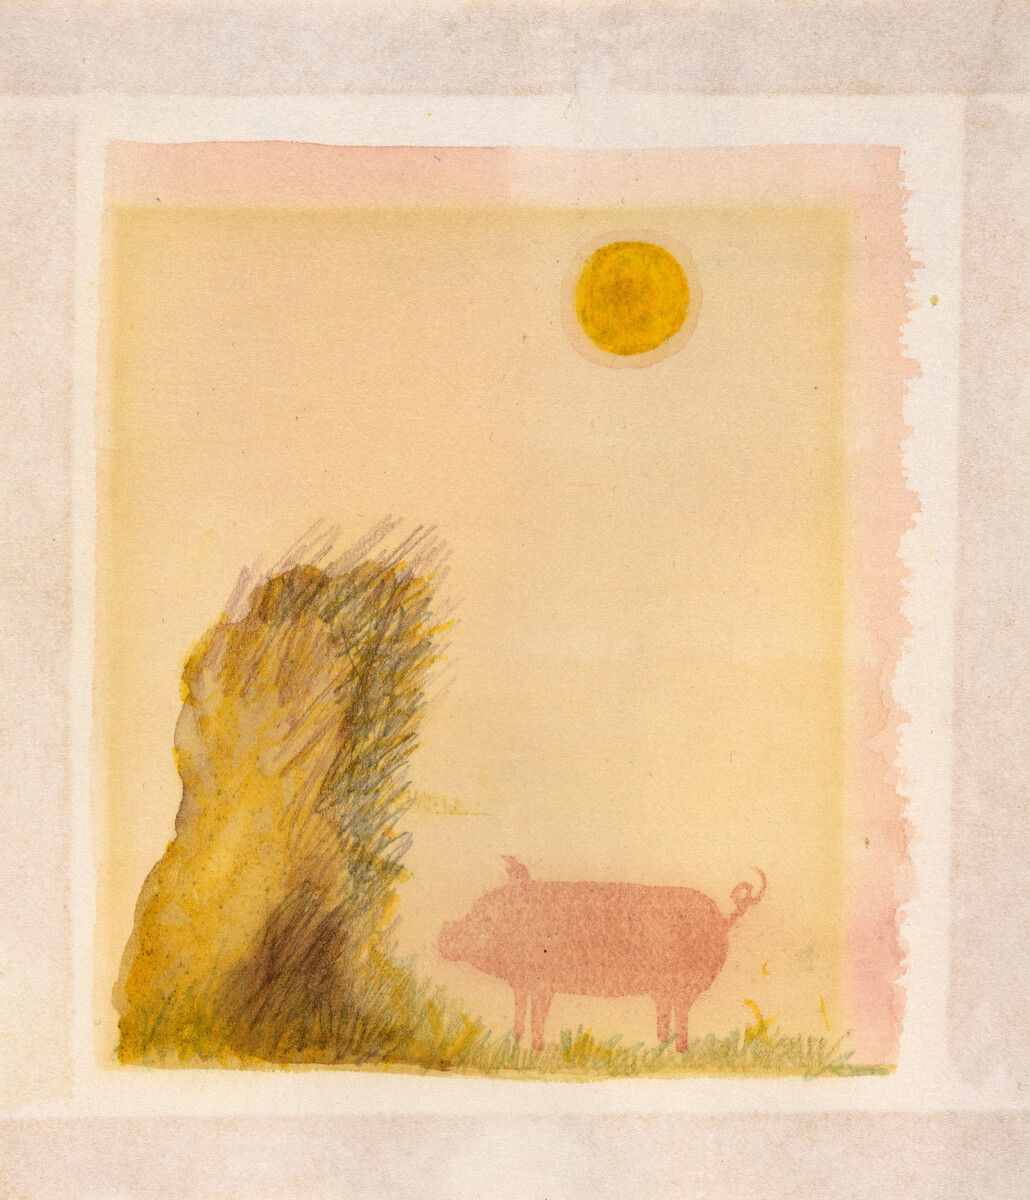 Illustration of a pig and a haystack with a small sun in the corner.